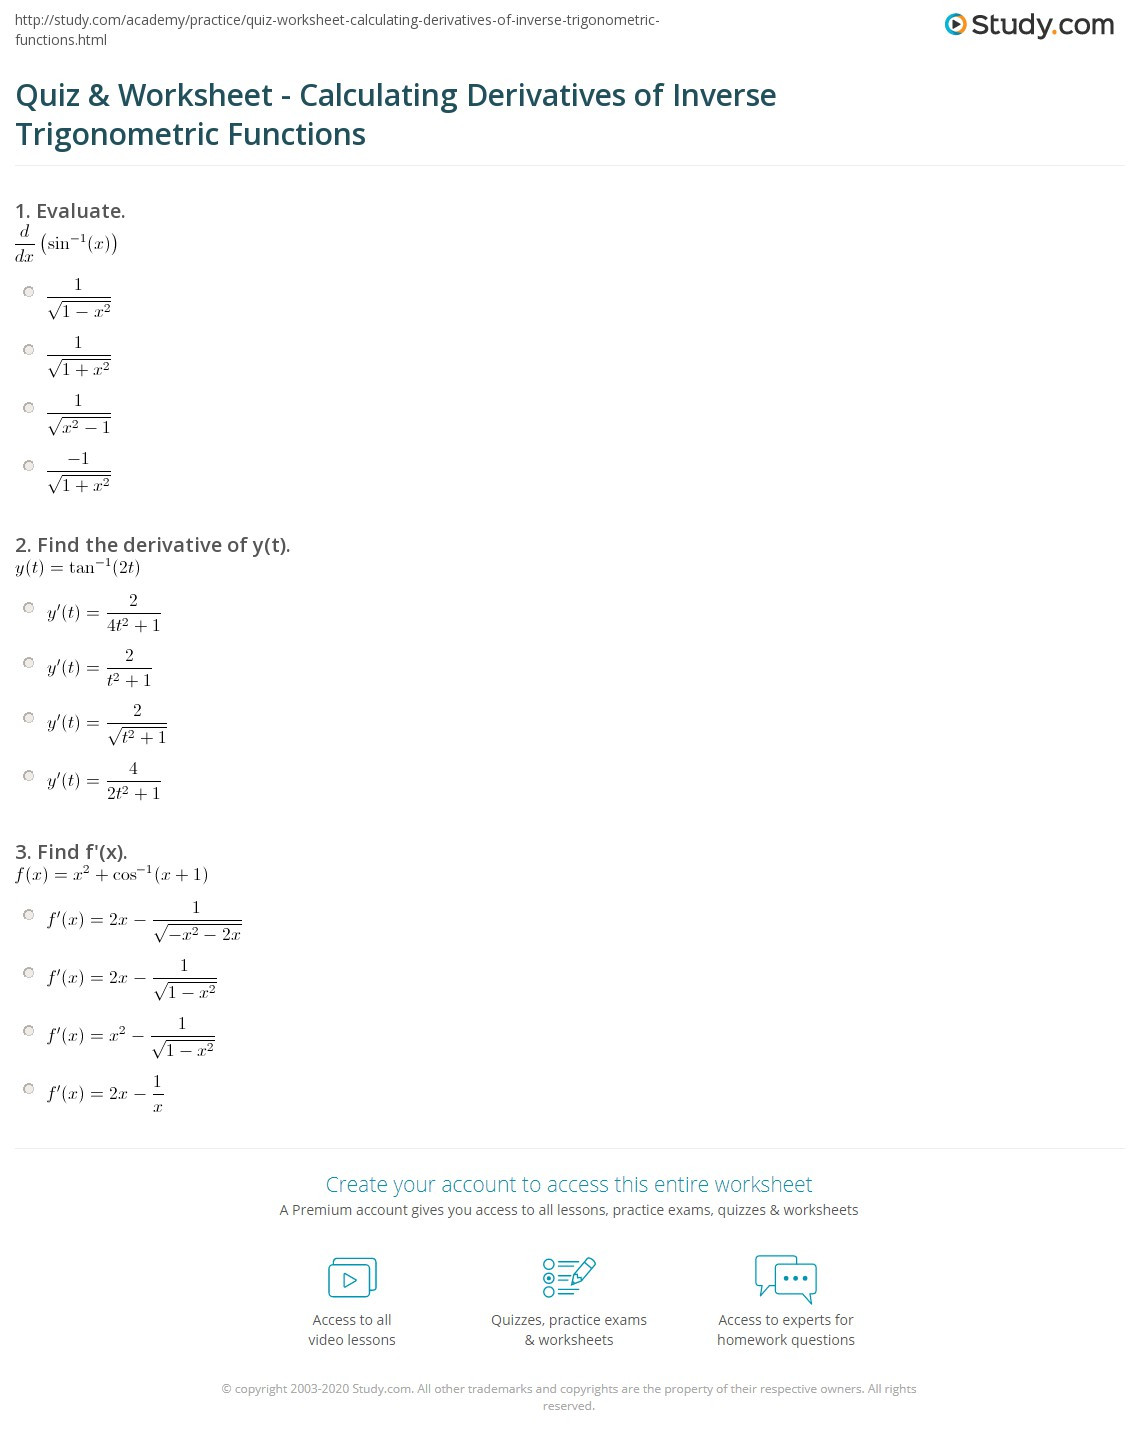 Inverse Functions Worksheet with Answers Quiz &amp; Worksheet Calculating Derivatives Of Inverse